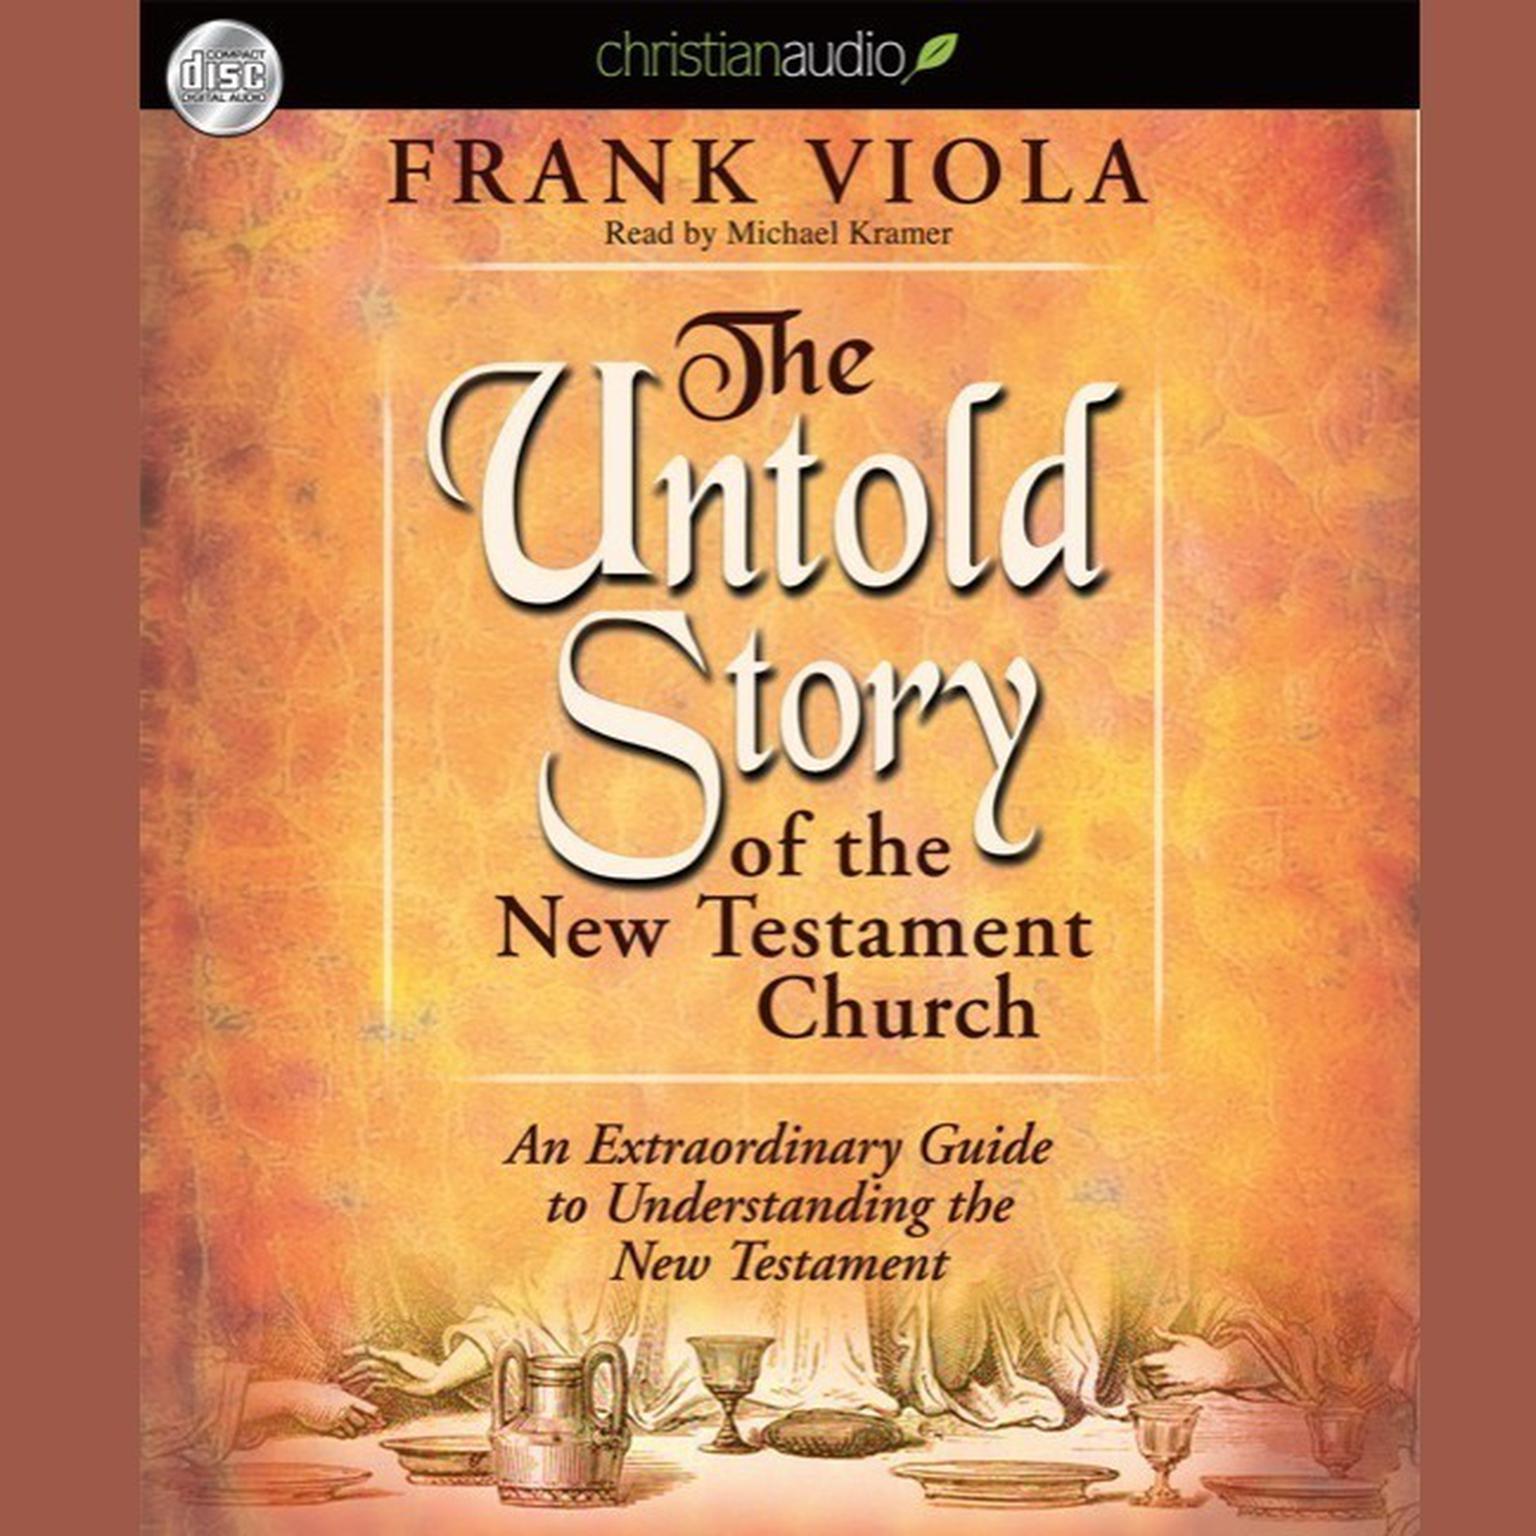 Untold Story of the New Testament Church: An Extraordinary Guide to Understanding the New Testament Audiobook, by Frank Viola